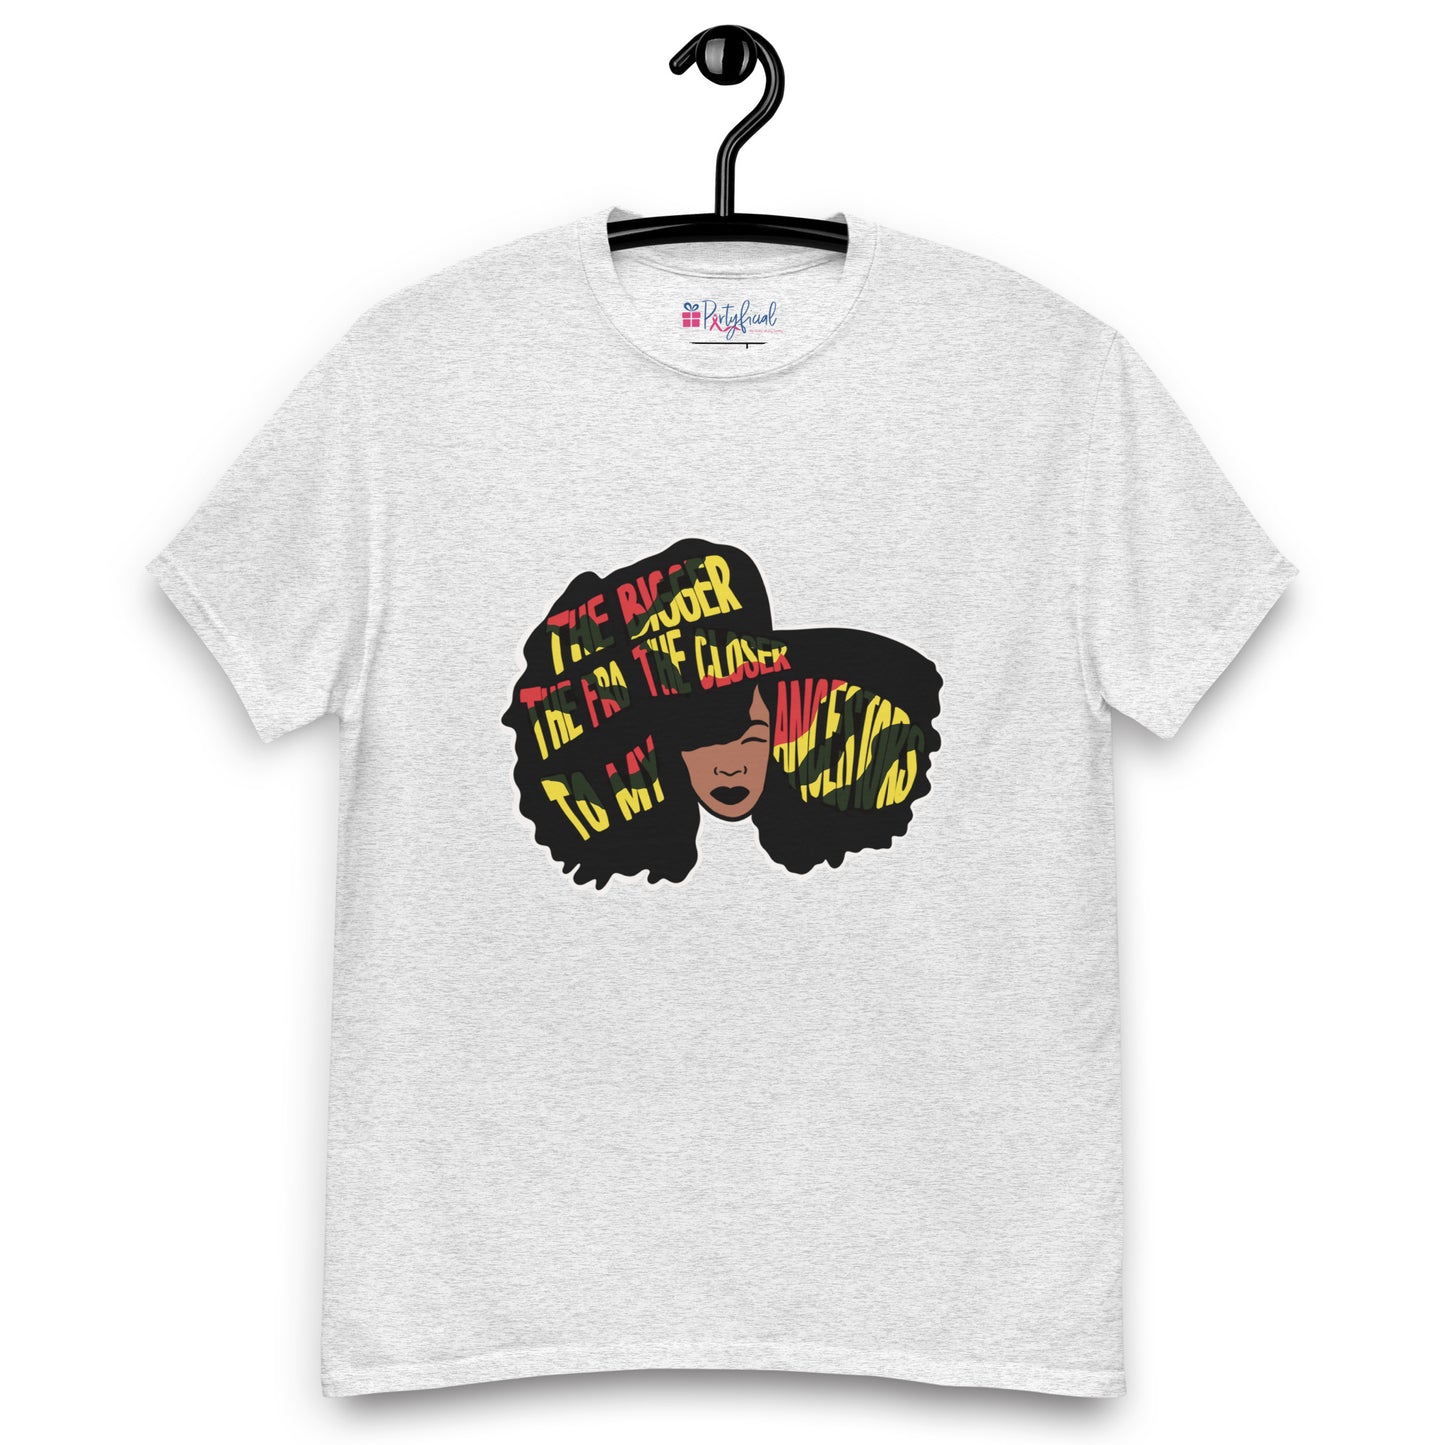 Juneteenth Fro classic tee